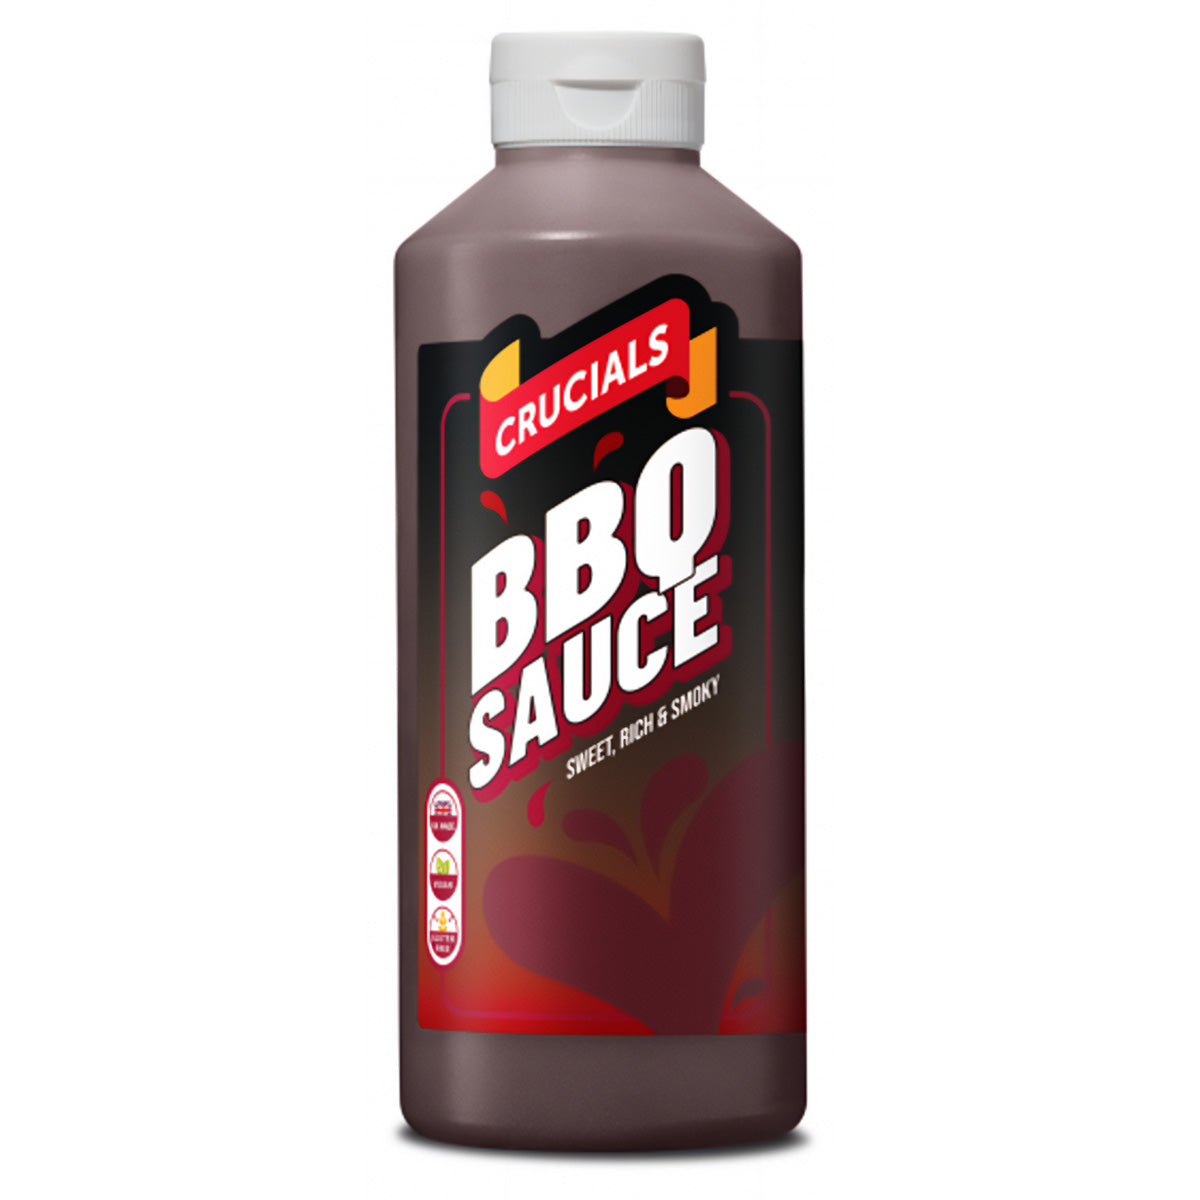 A bottle of Crucials - Squeezy BBQ Sauce - 500ml on a white background.